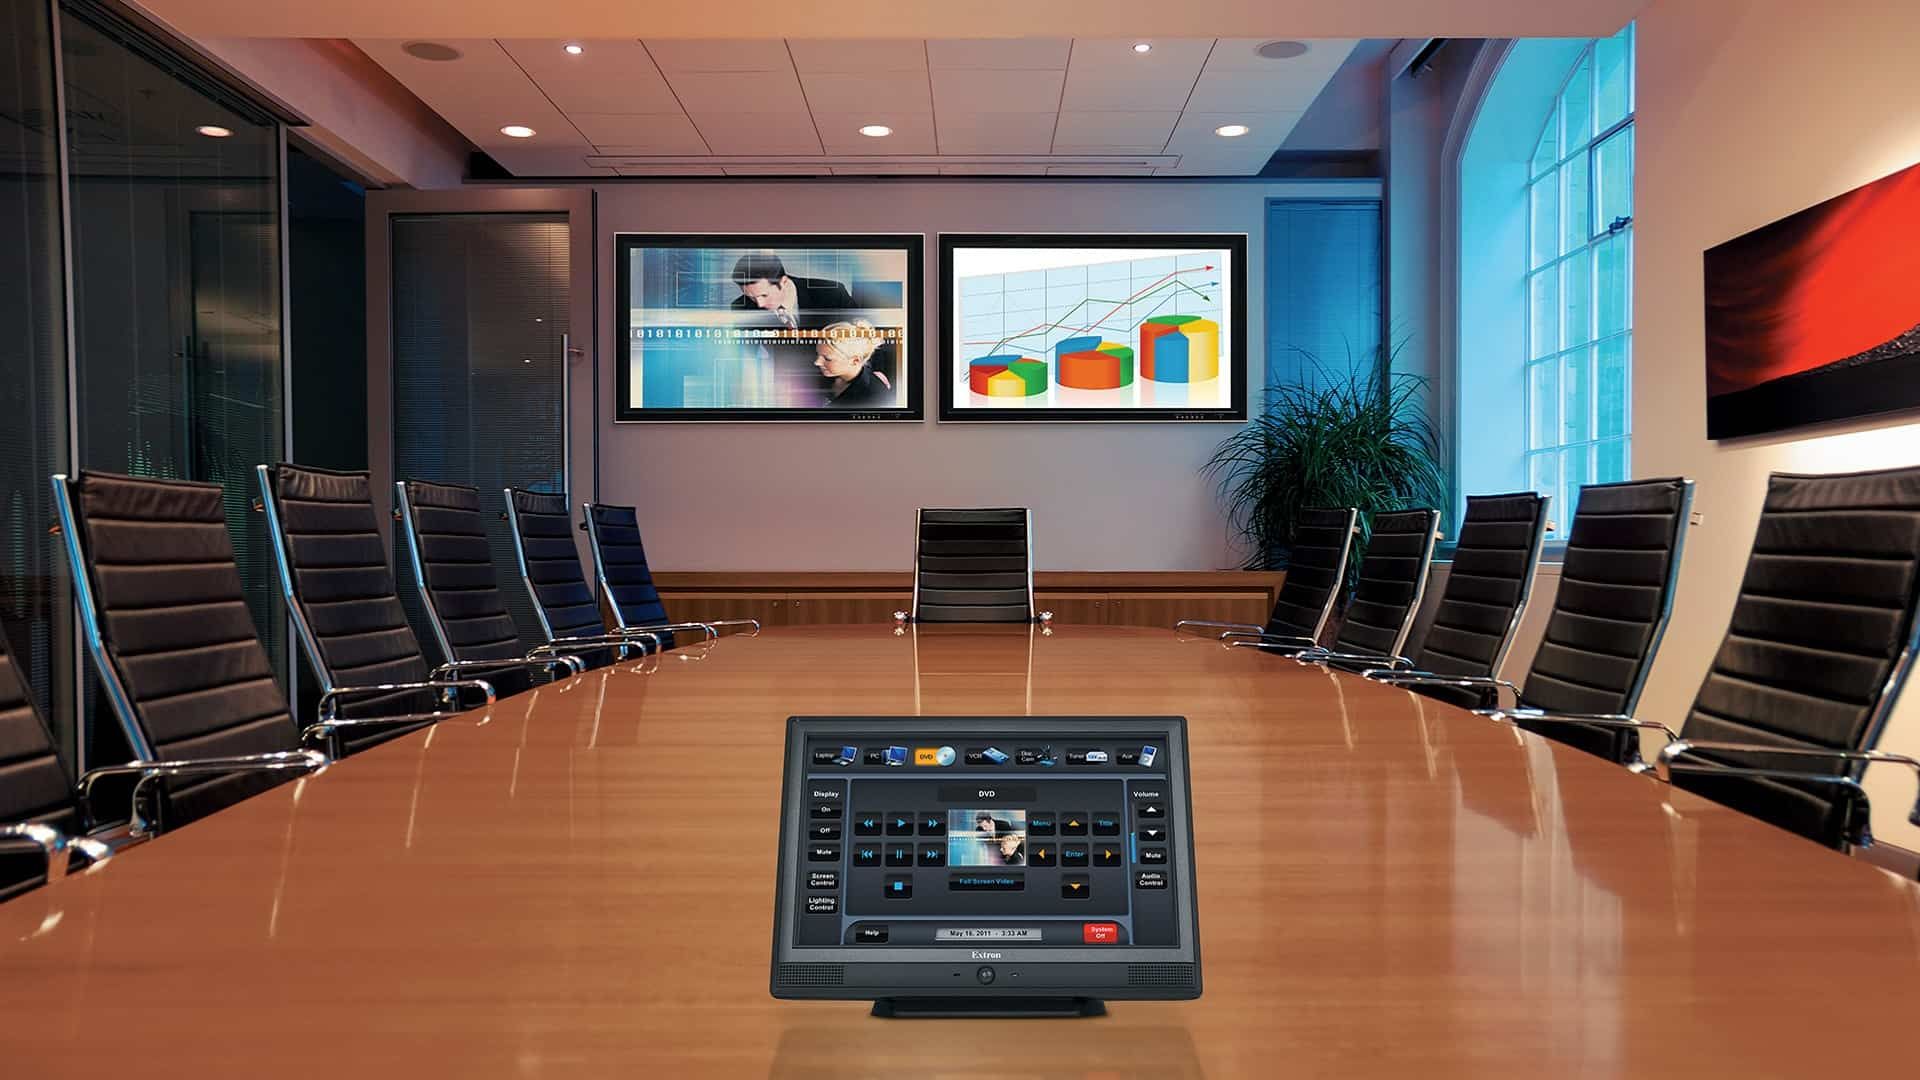 Picture of a board meeting room. There are more than 10 black chairs around a long table with a table controlling two TVs at the end of the room